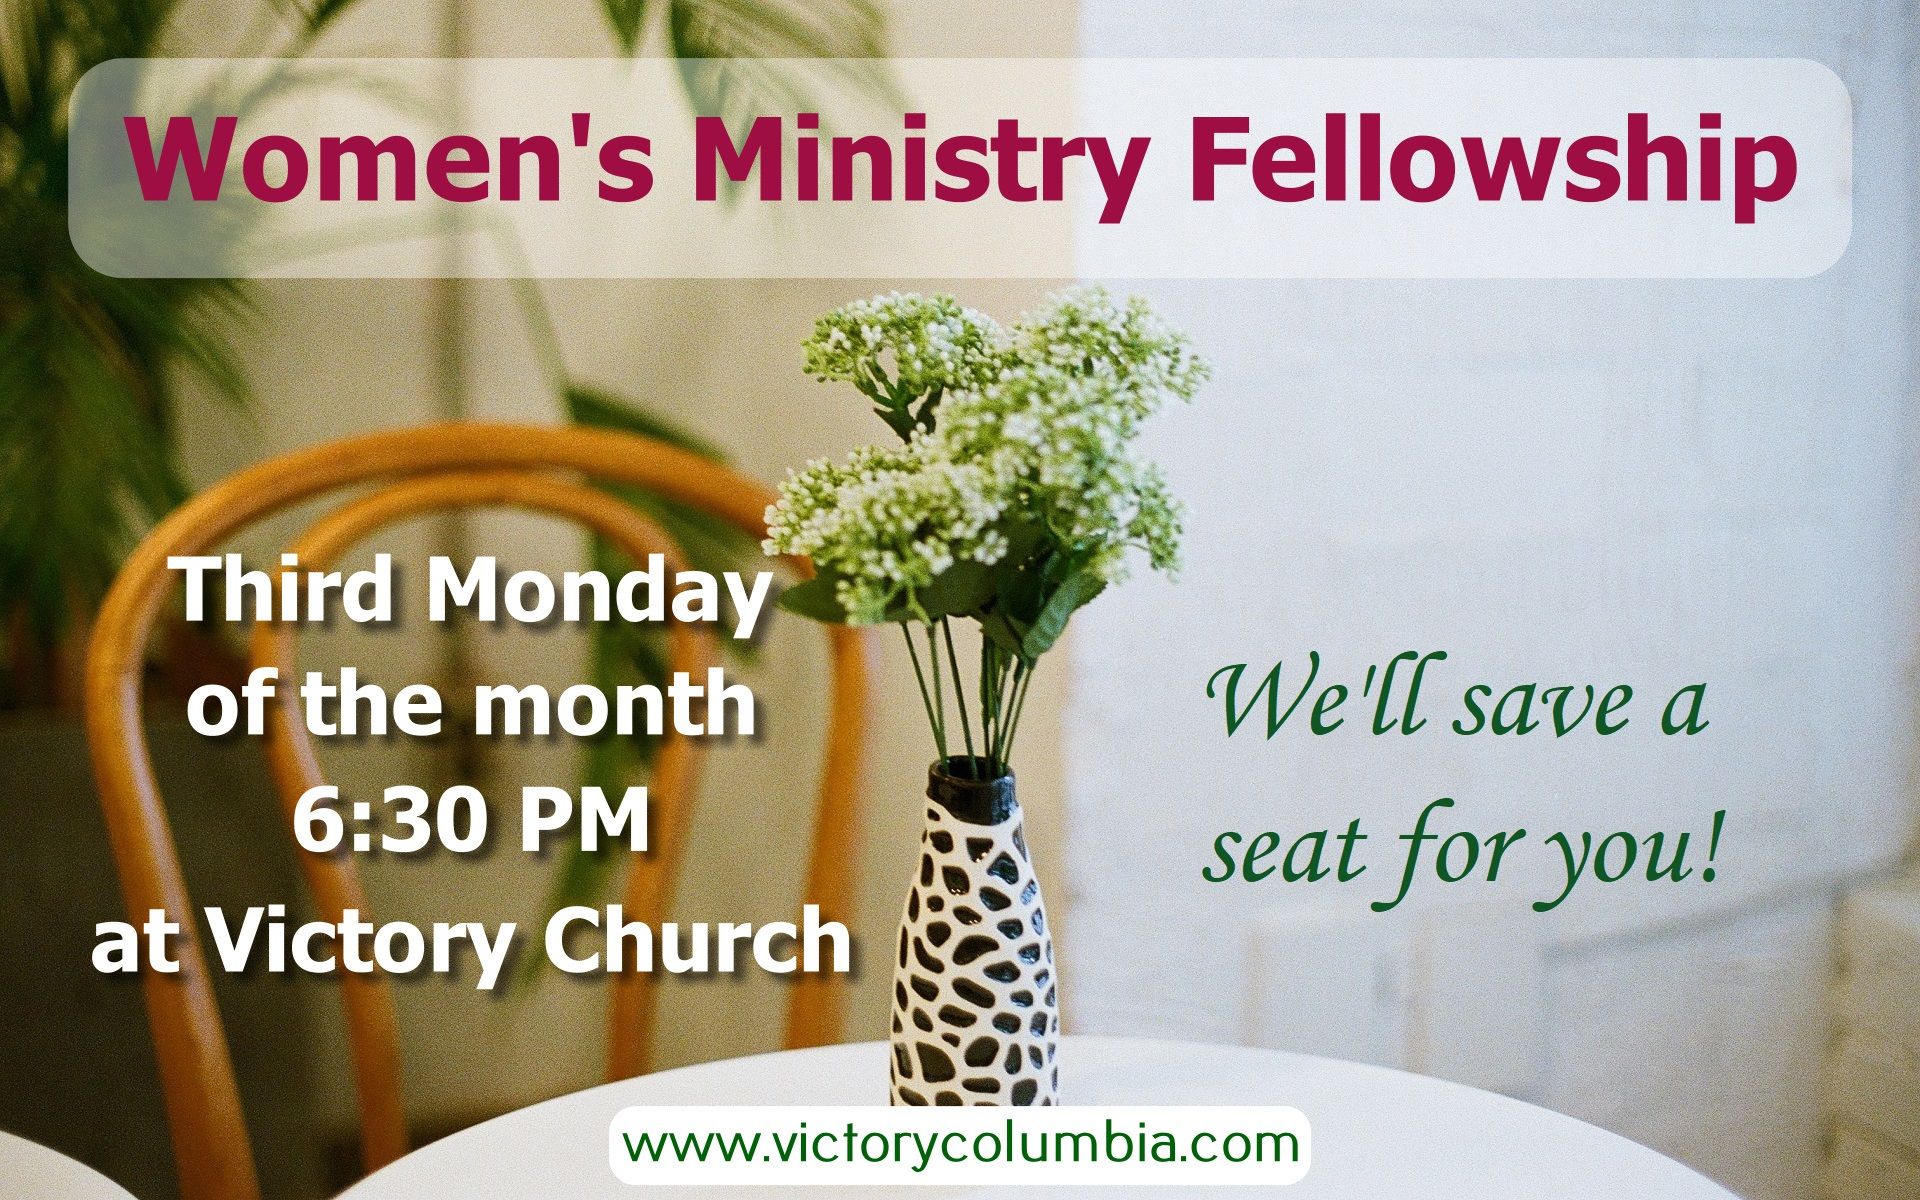 Victory Church Hosts Sunday School Events & More Fun Christian Activities in Columbia, MO